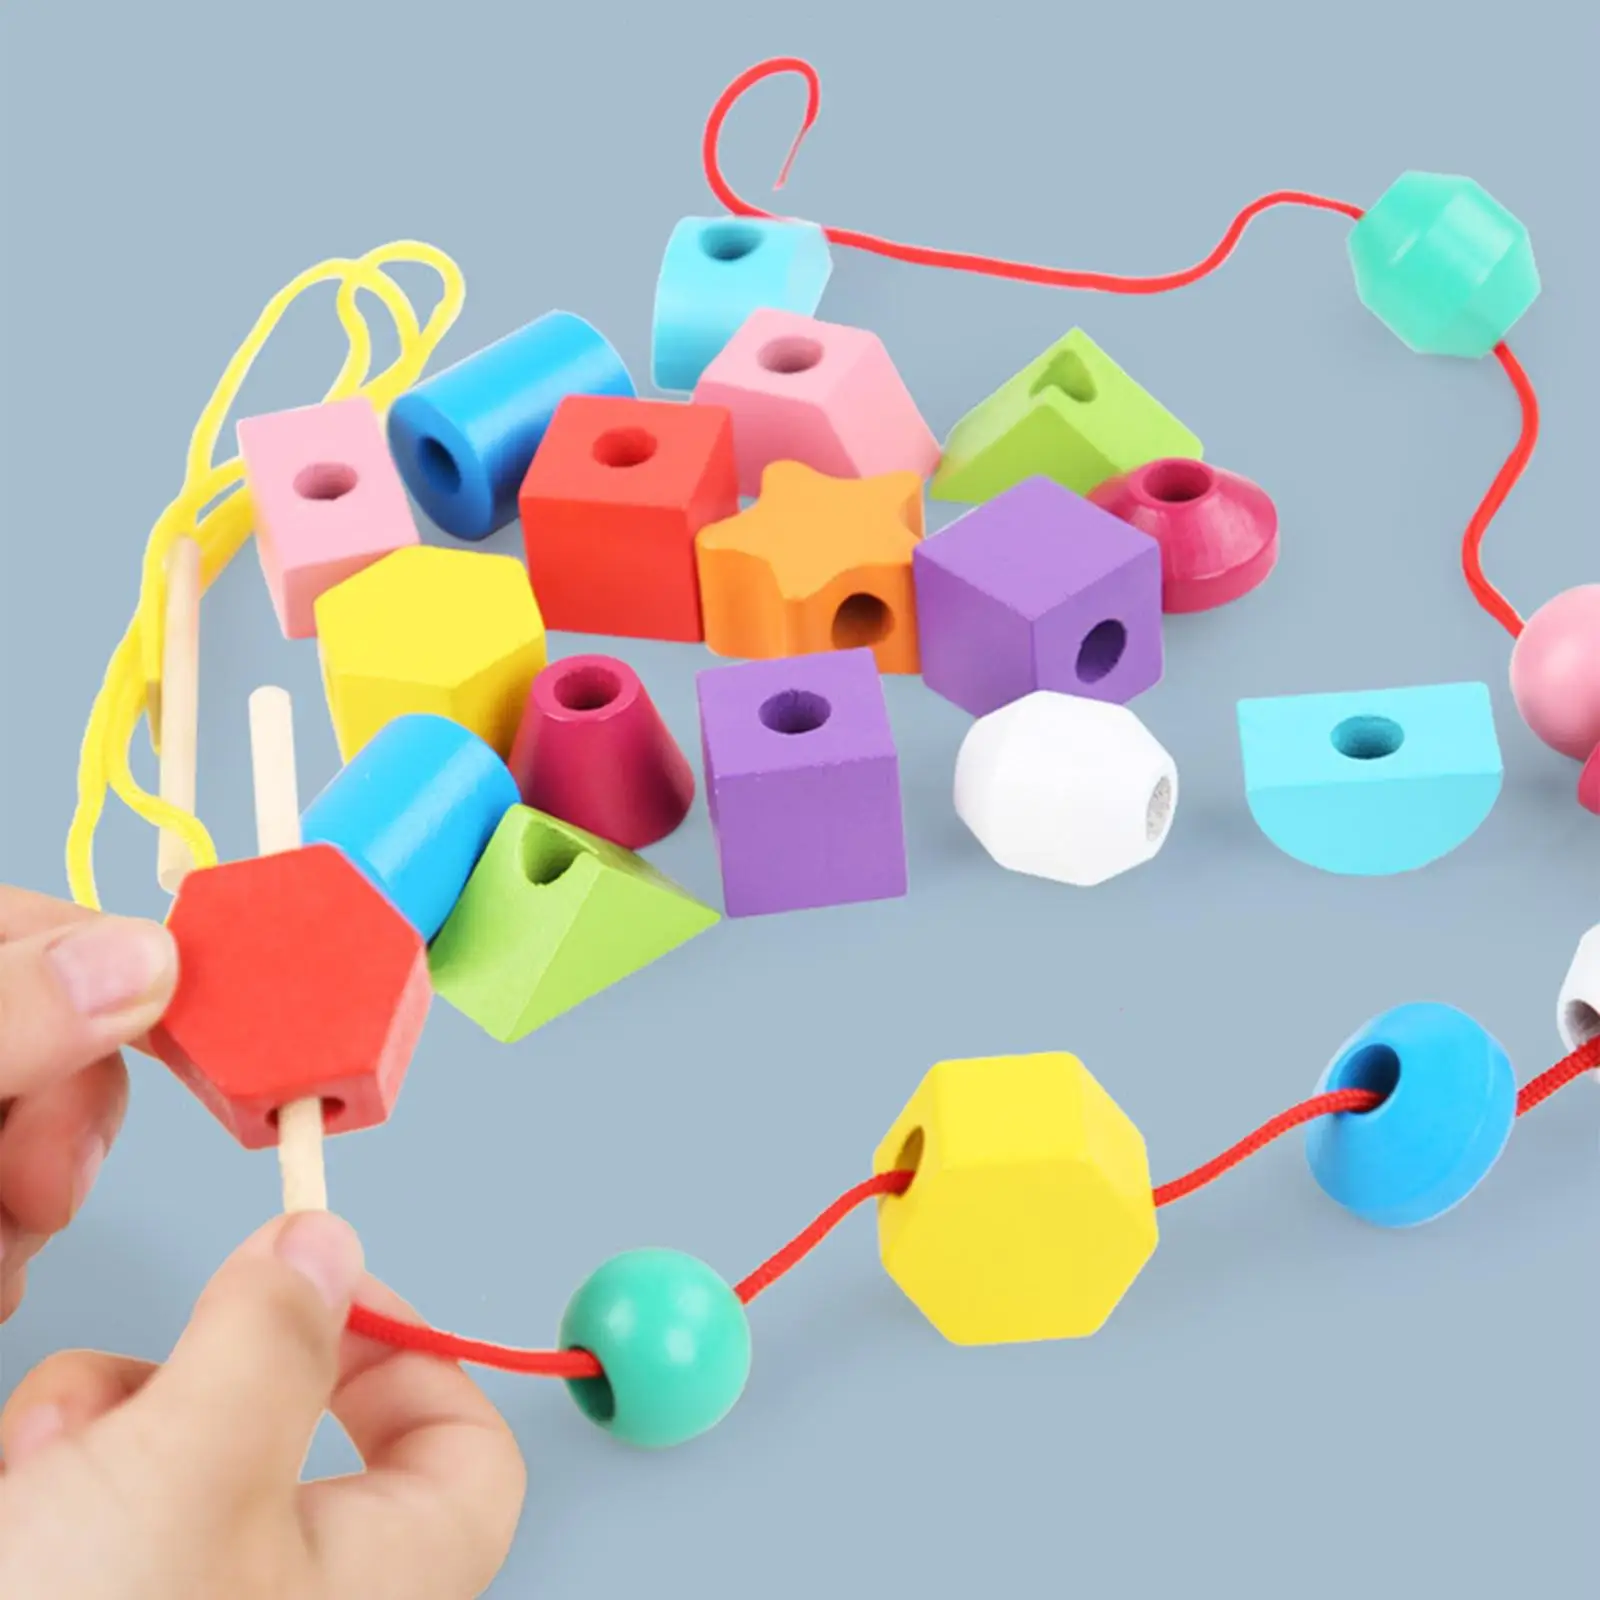 Five Sets Beaded Toys Educational Sensory Toy Wooden Learning Colorful Blocks for Toddlers Birthday Gift Children Kids Preschool